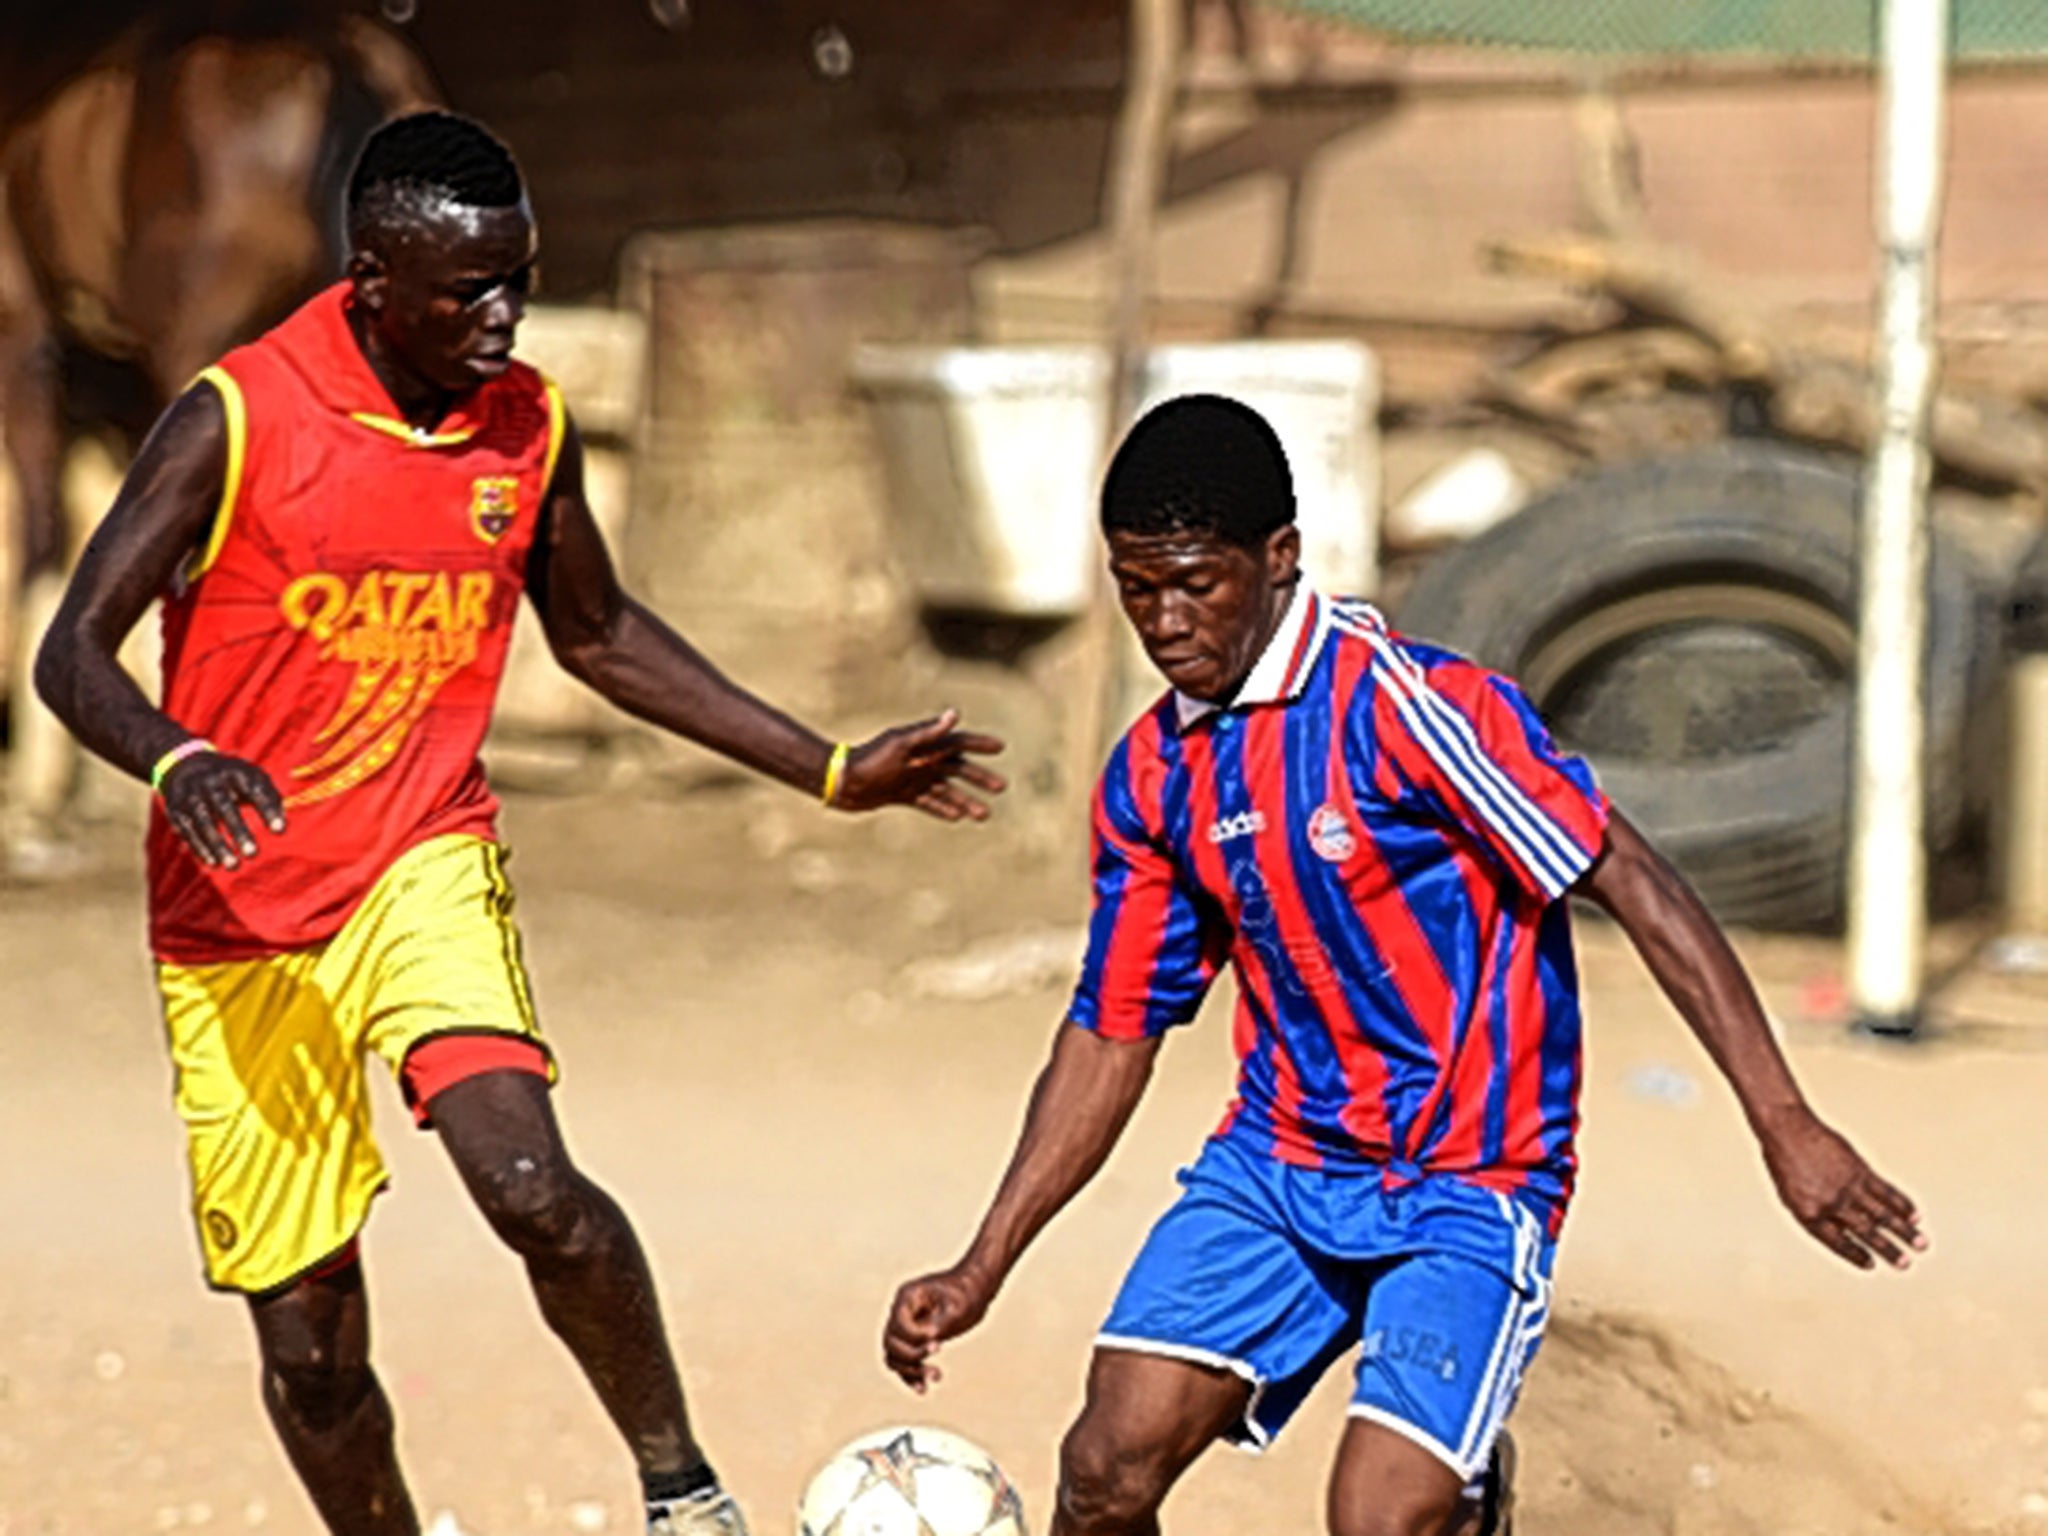 Youngsters like these, playing football in Dakar, Senegal, are potential victims of trafficking